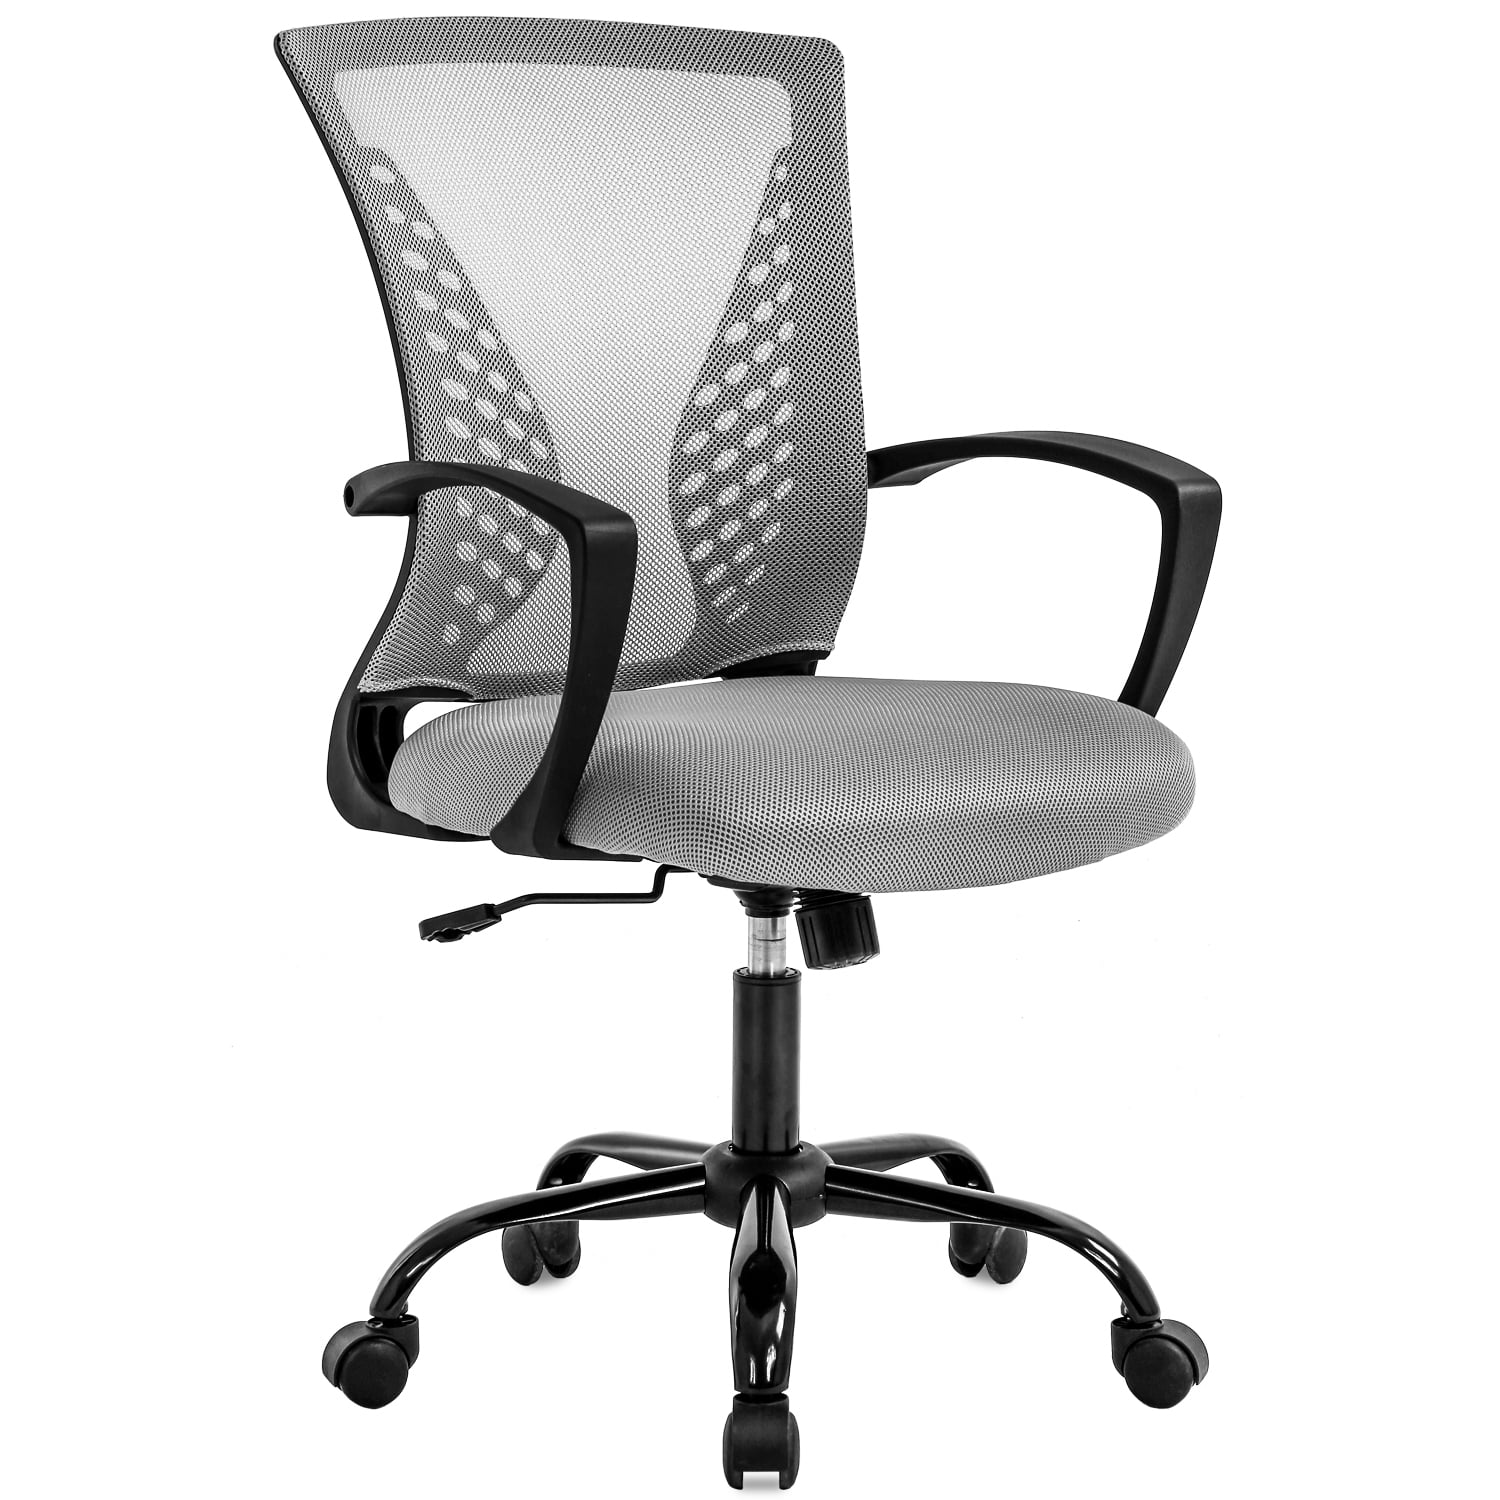 Halifax North America Rolling Chair 43 High Office Chair Mesh Mid-Back Swivel Computer Desk Task Chair Home Study Rocker with | Mathis Home